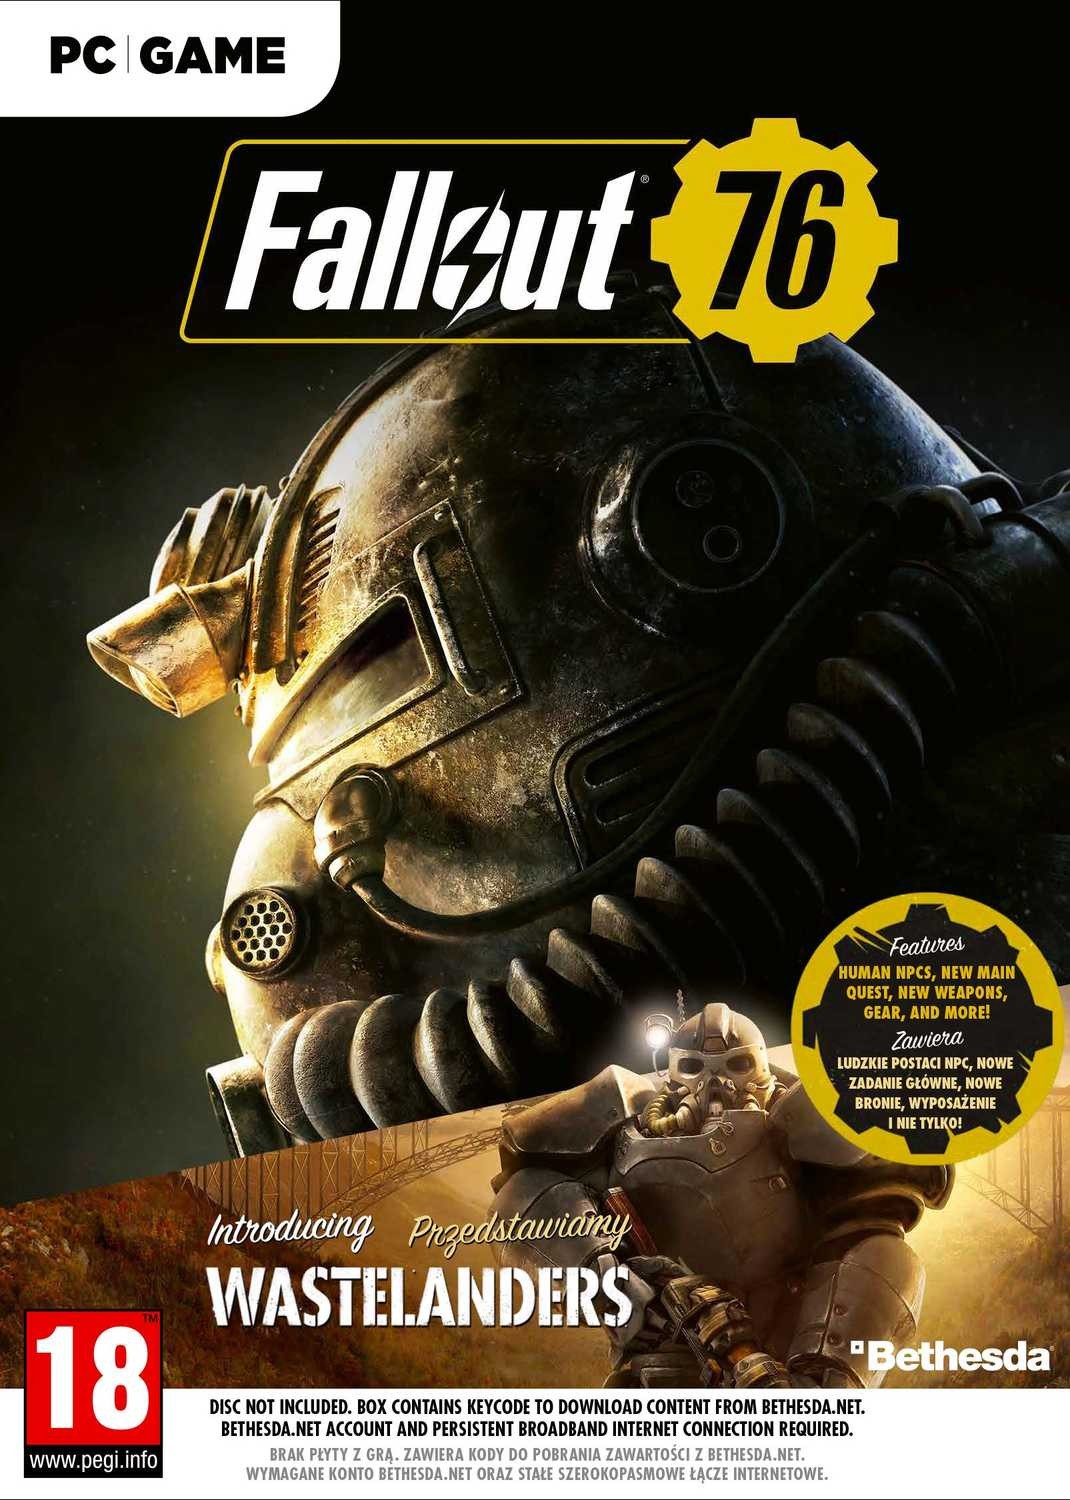 Fallout 76 Wastelanders (PC)